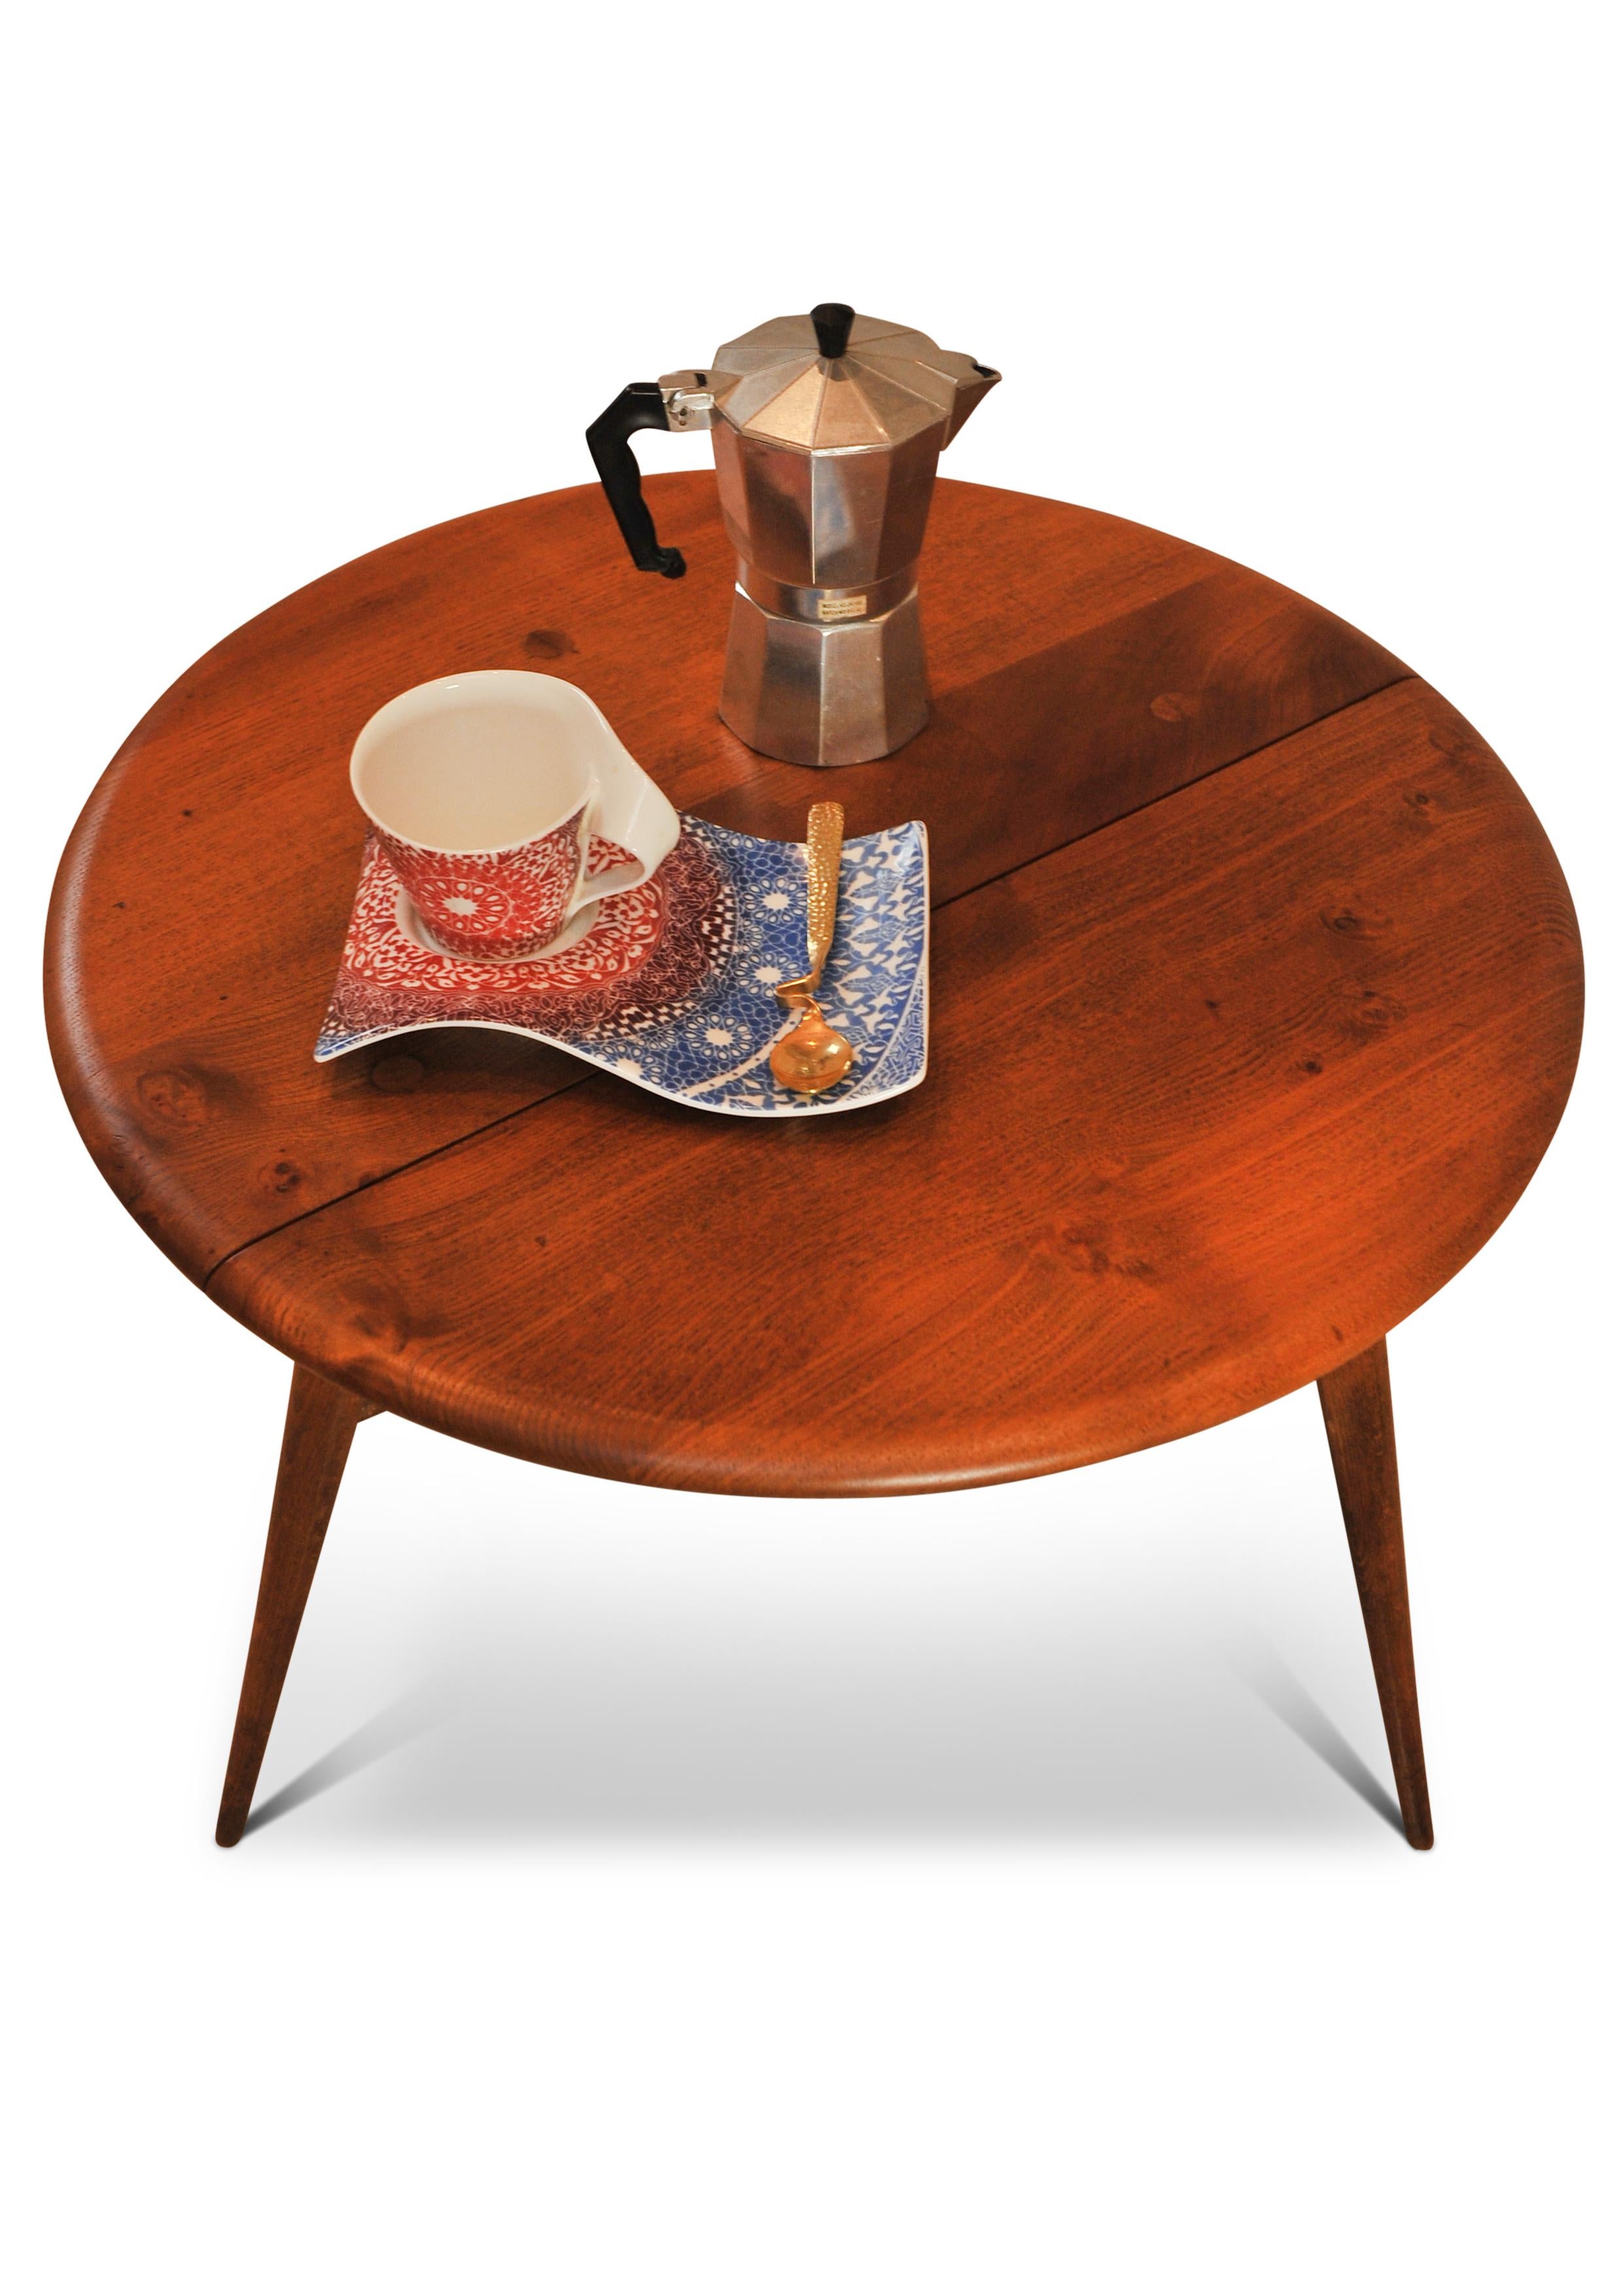 English Mid Century Hand Made Ercol Beech & Elm Drop Leaf Coffee Lounge Table.
Ercol furniture was exhibited at the 1951 Festival of Britain, as it represented the latest style and fashion in furniture design and manufacture.

Ercol produces